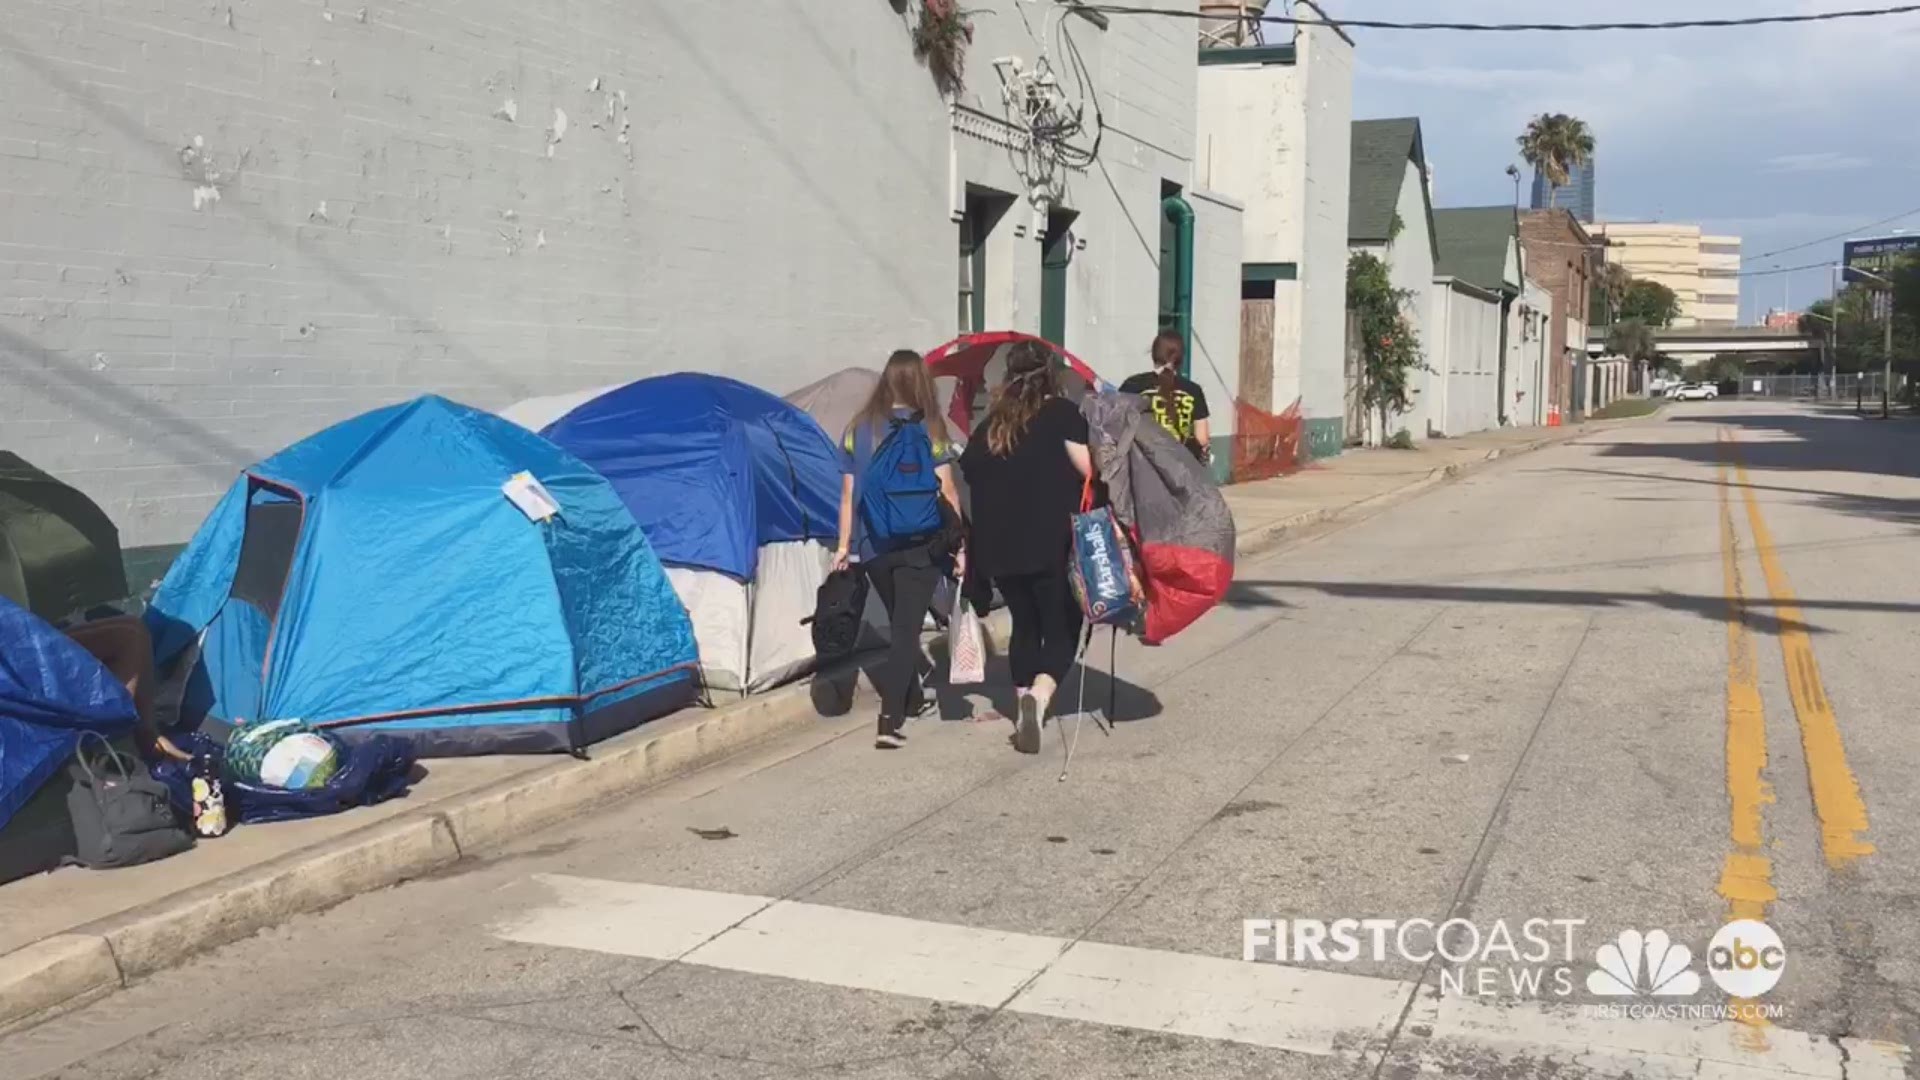 It's Wednesday and the show isn't until Friday. That didn't stop these fans from camping out to see Twenty One Pilots in Jacksonville.